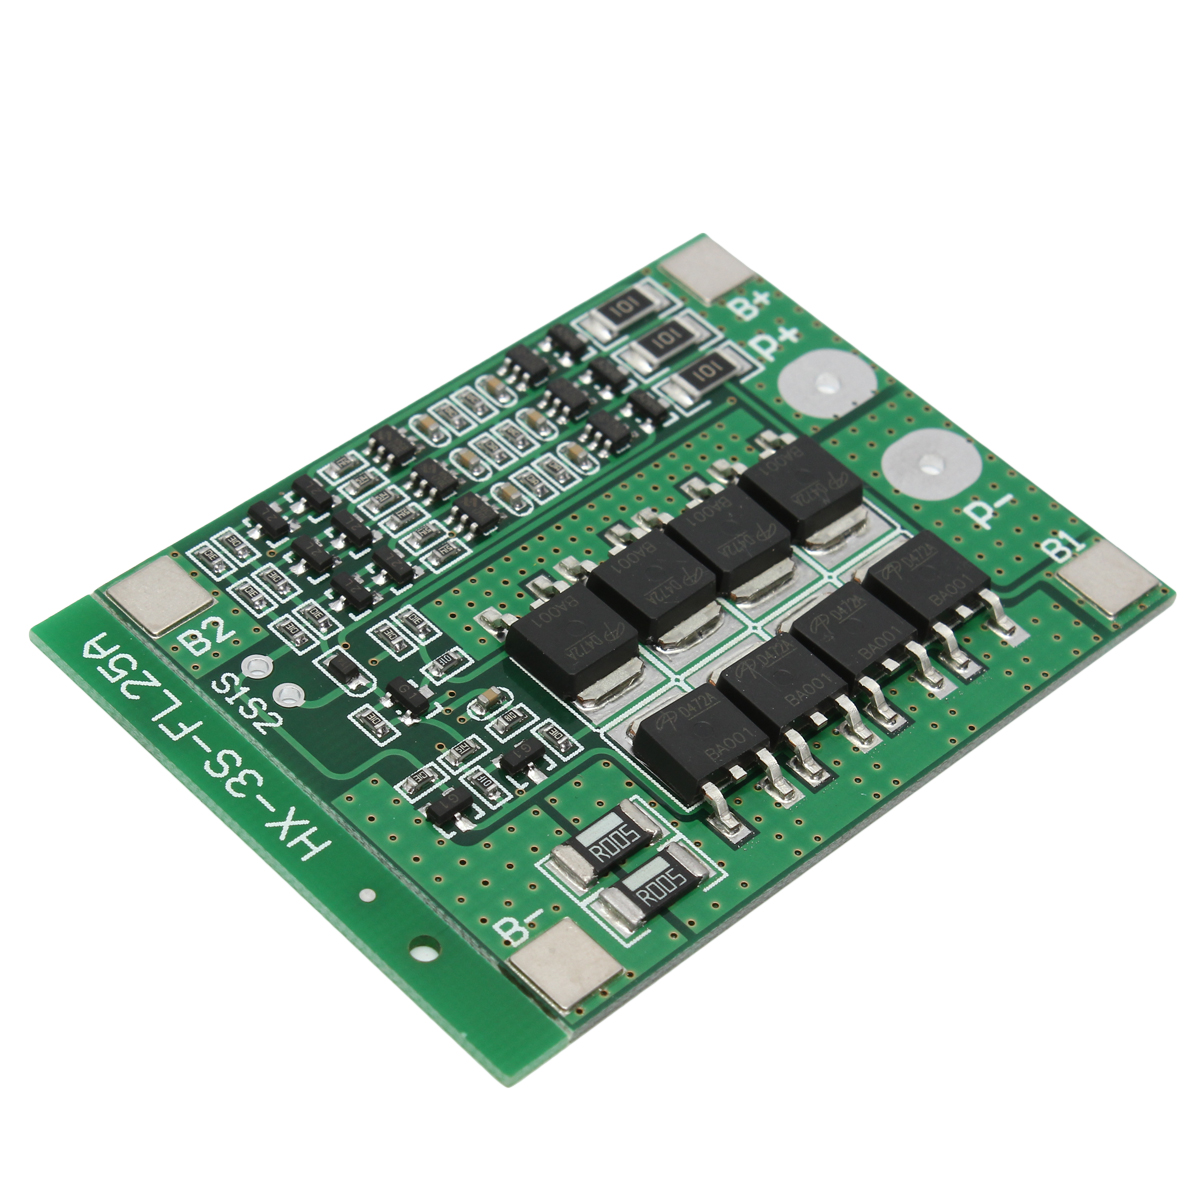 20pcs-3S-111V-25A-18650-Li-ion-Lithium-Battery-BMS-Protection-PCB-Board-With-Balance-Function-1388423